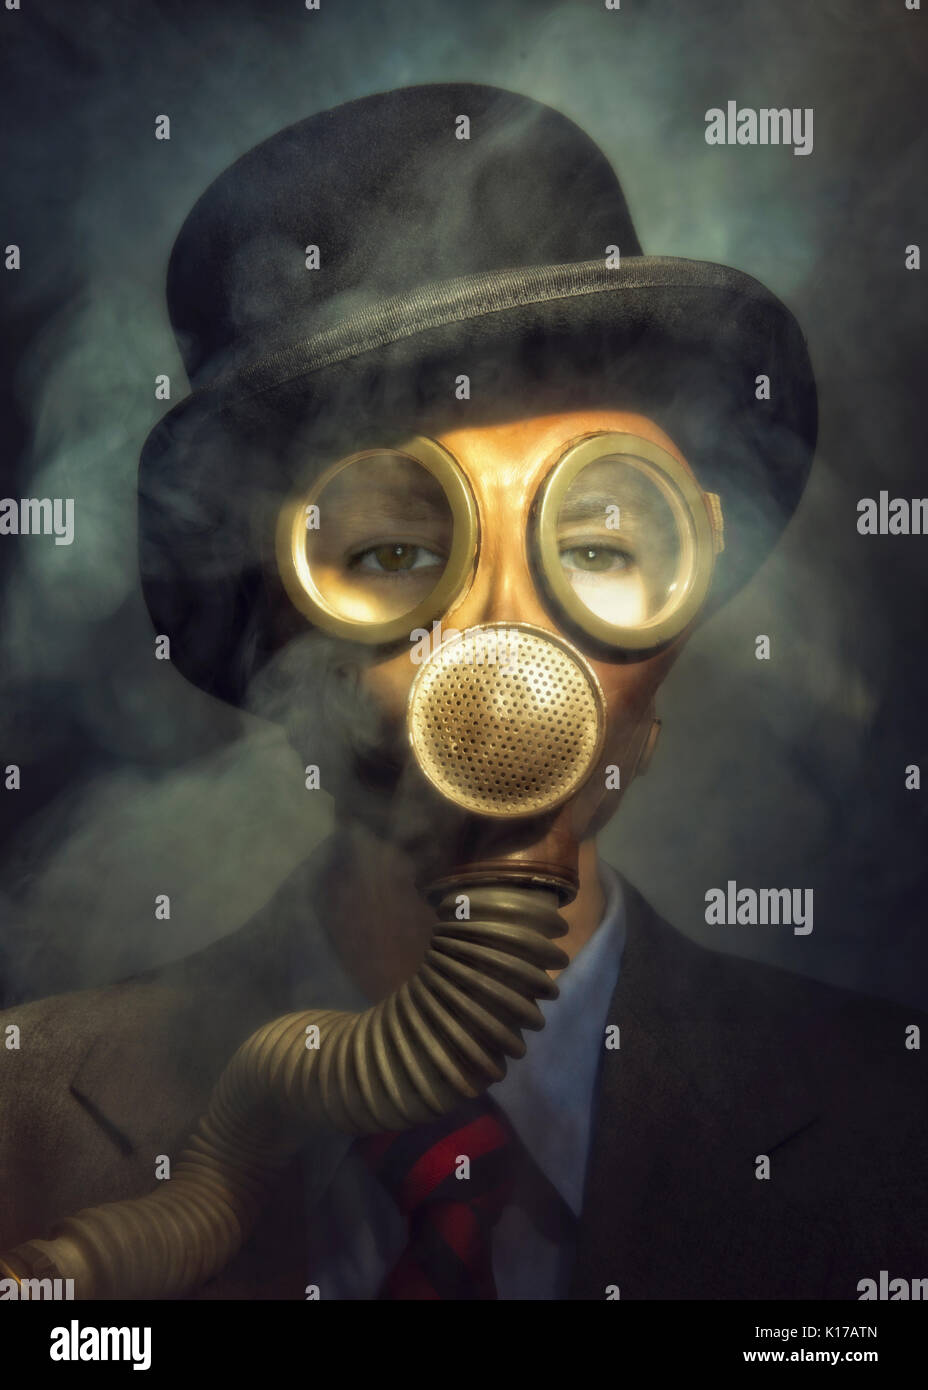 person in hat and suit wearing gas mask with smoke Stock Photo